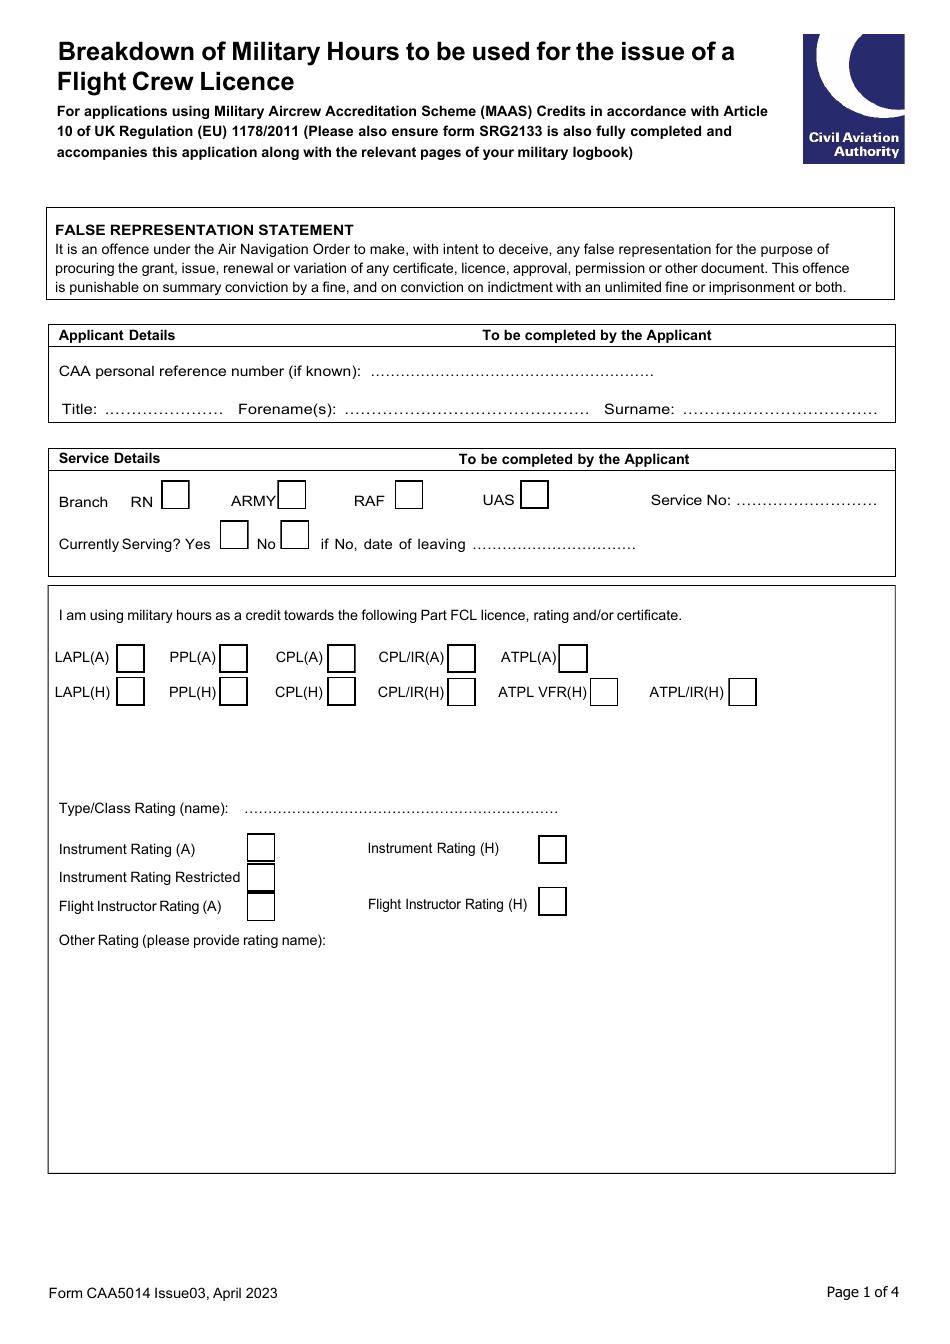 Form CAA5014 Breakdown of Military Hours to Be Used for the Issue of a Flight Crew Licence - United Kingdom, Page 1